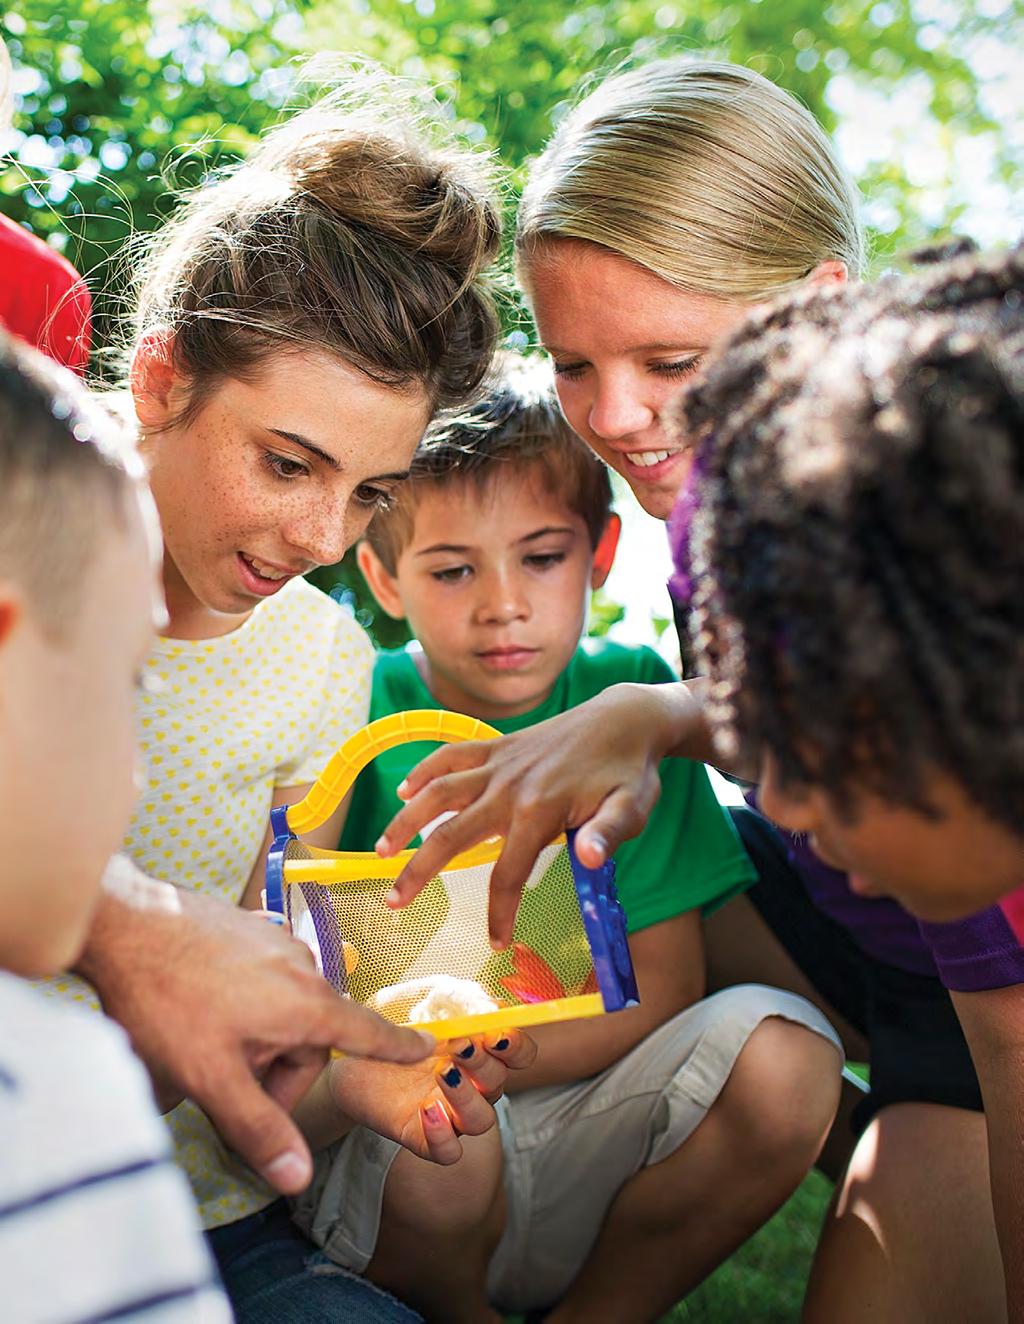 WELCOME TO THE BEST SUMMER EVER AT THE YMCA Summer Camps at the Lancaster Family YMCA provide a perfect backdrop of fun, friendship, educational activities and healthy play that encourages children